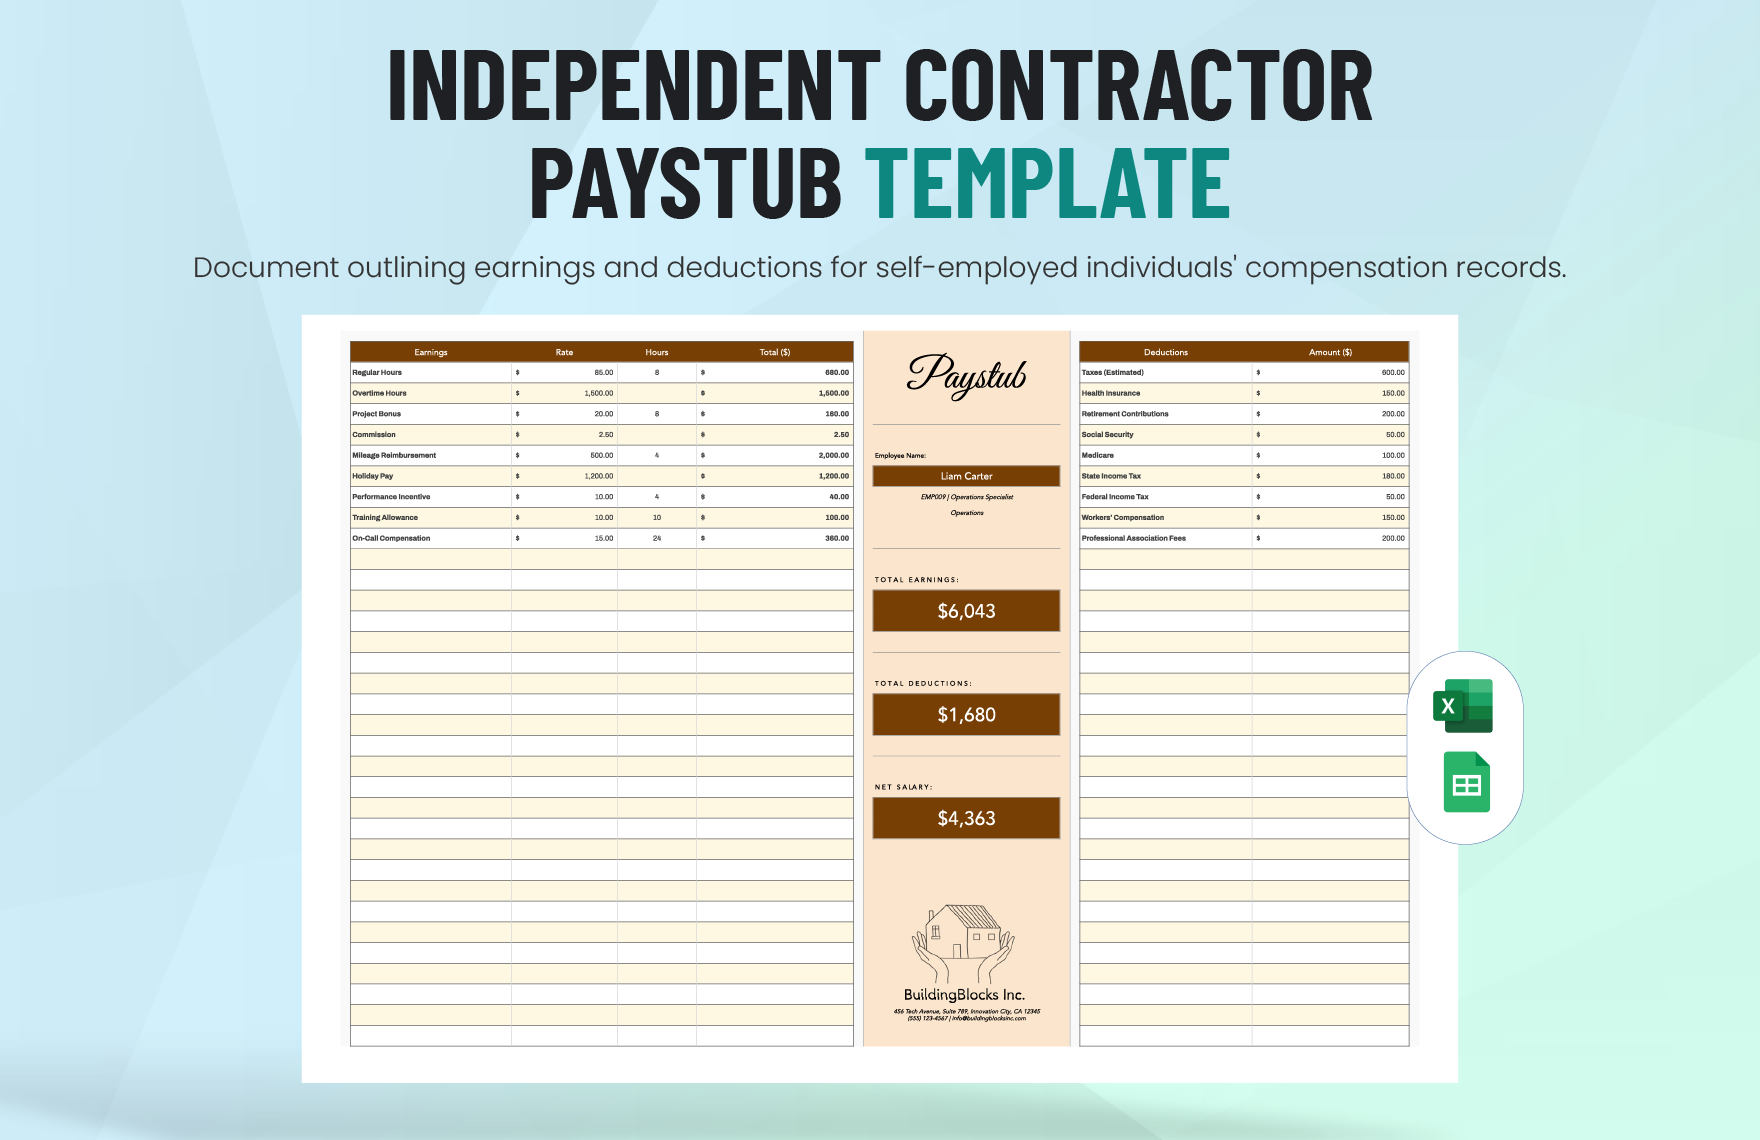 Independent Contractor Paystub Template